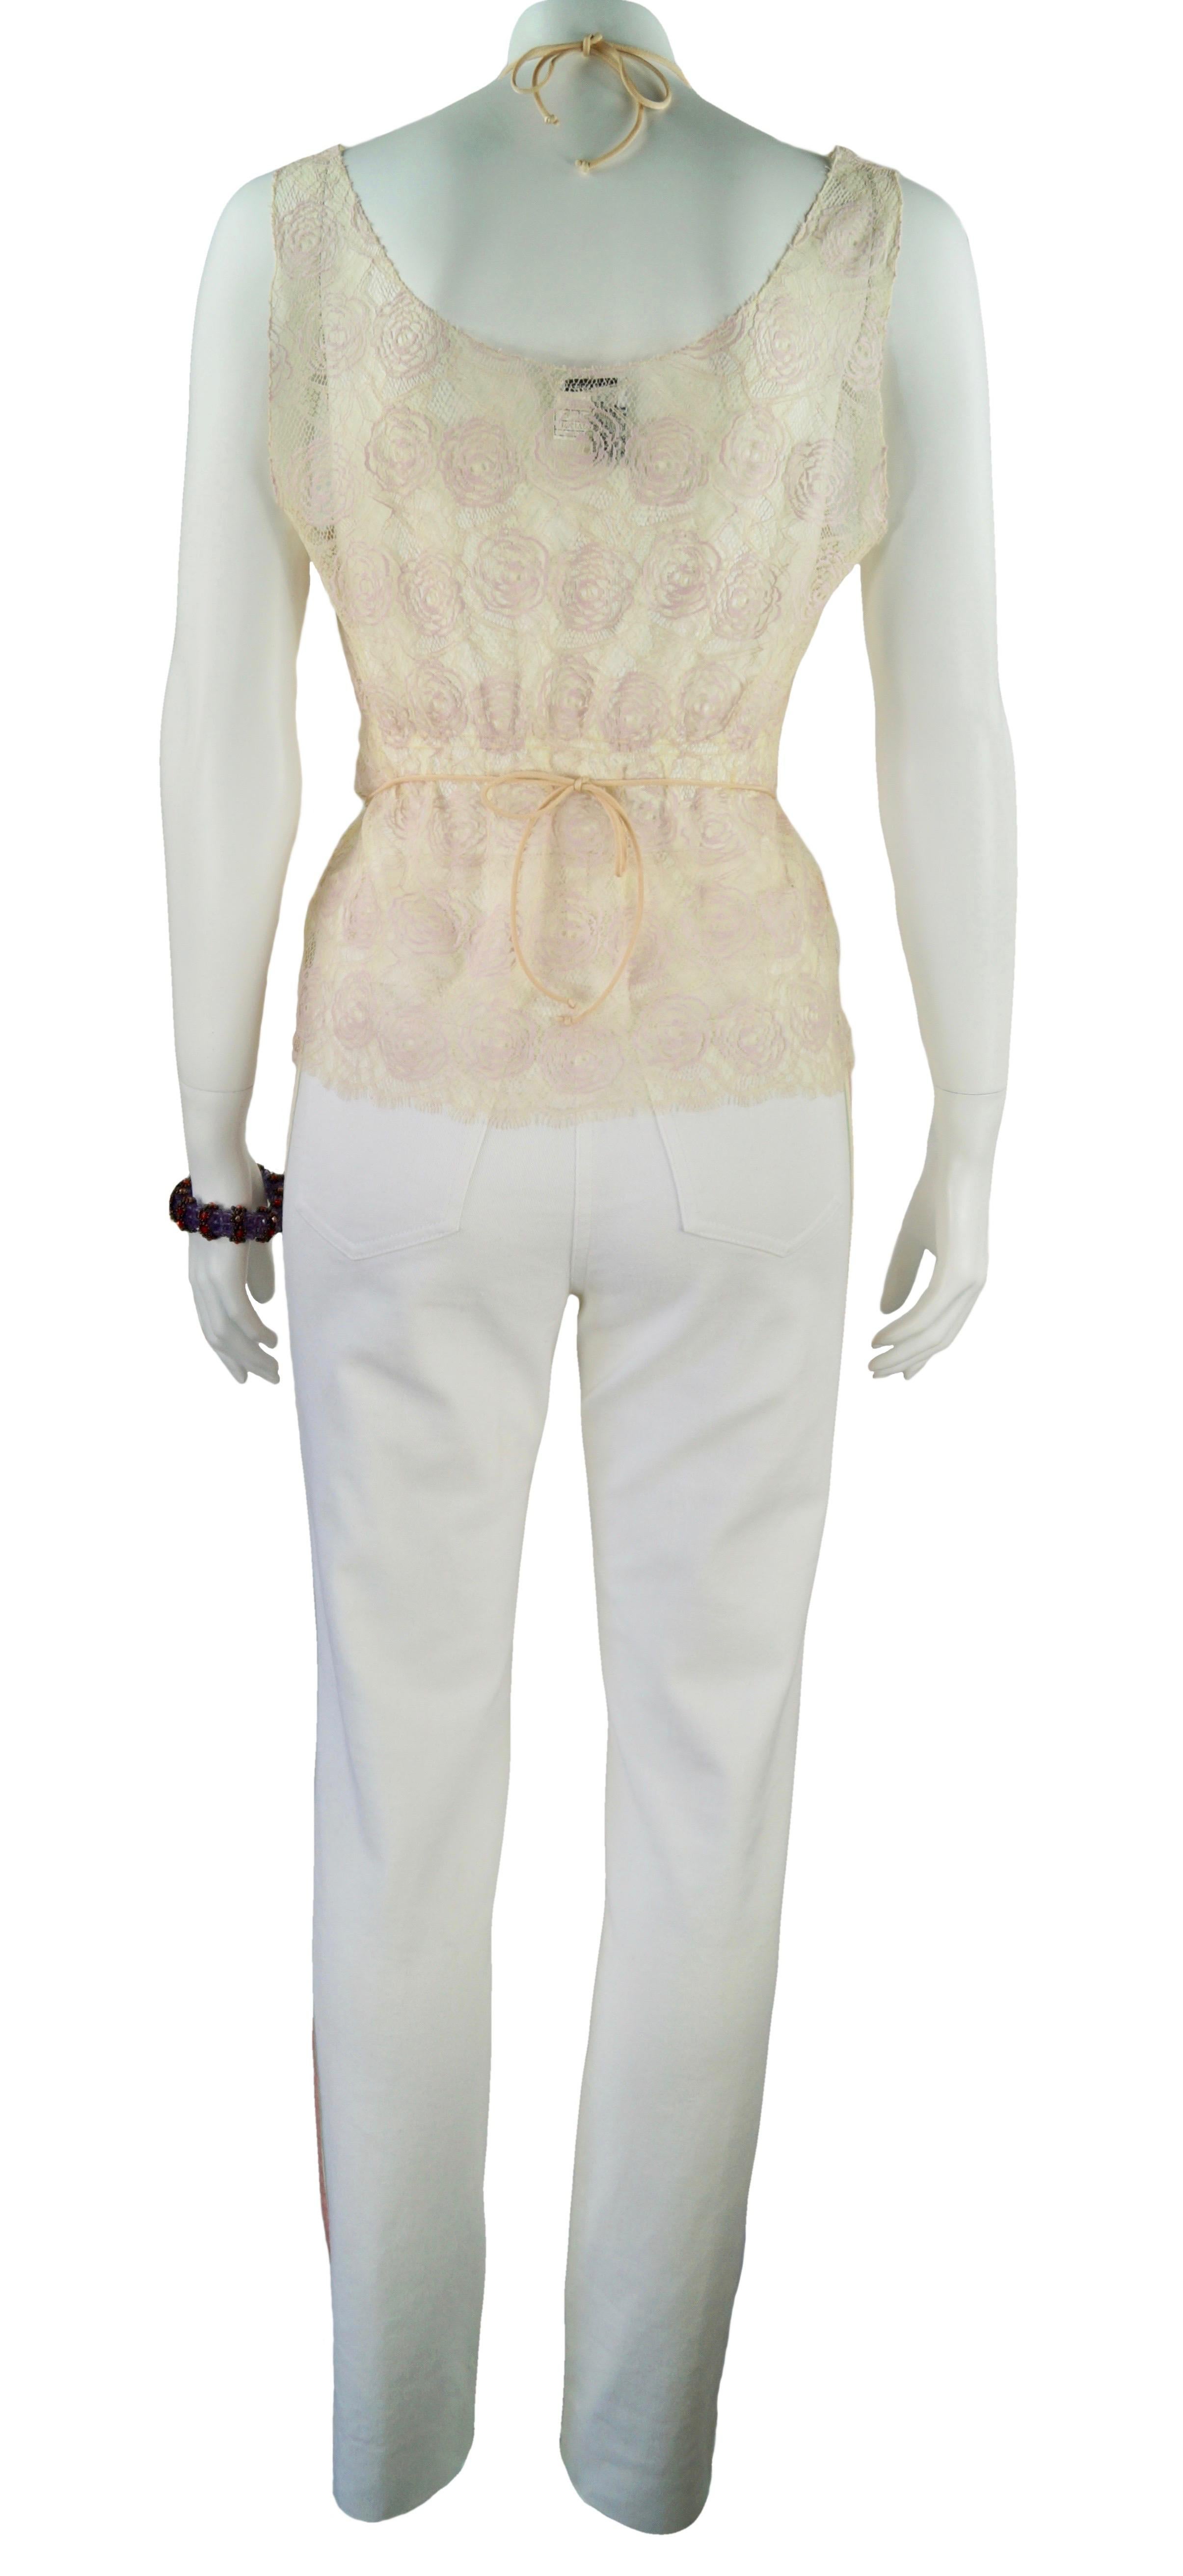 Gray CHANEL  lace top and white jeans Fr 42 - 38  Resort 2004  04C